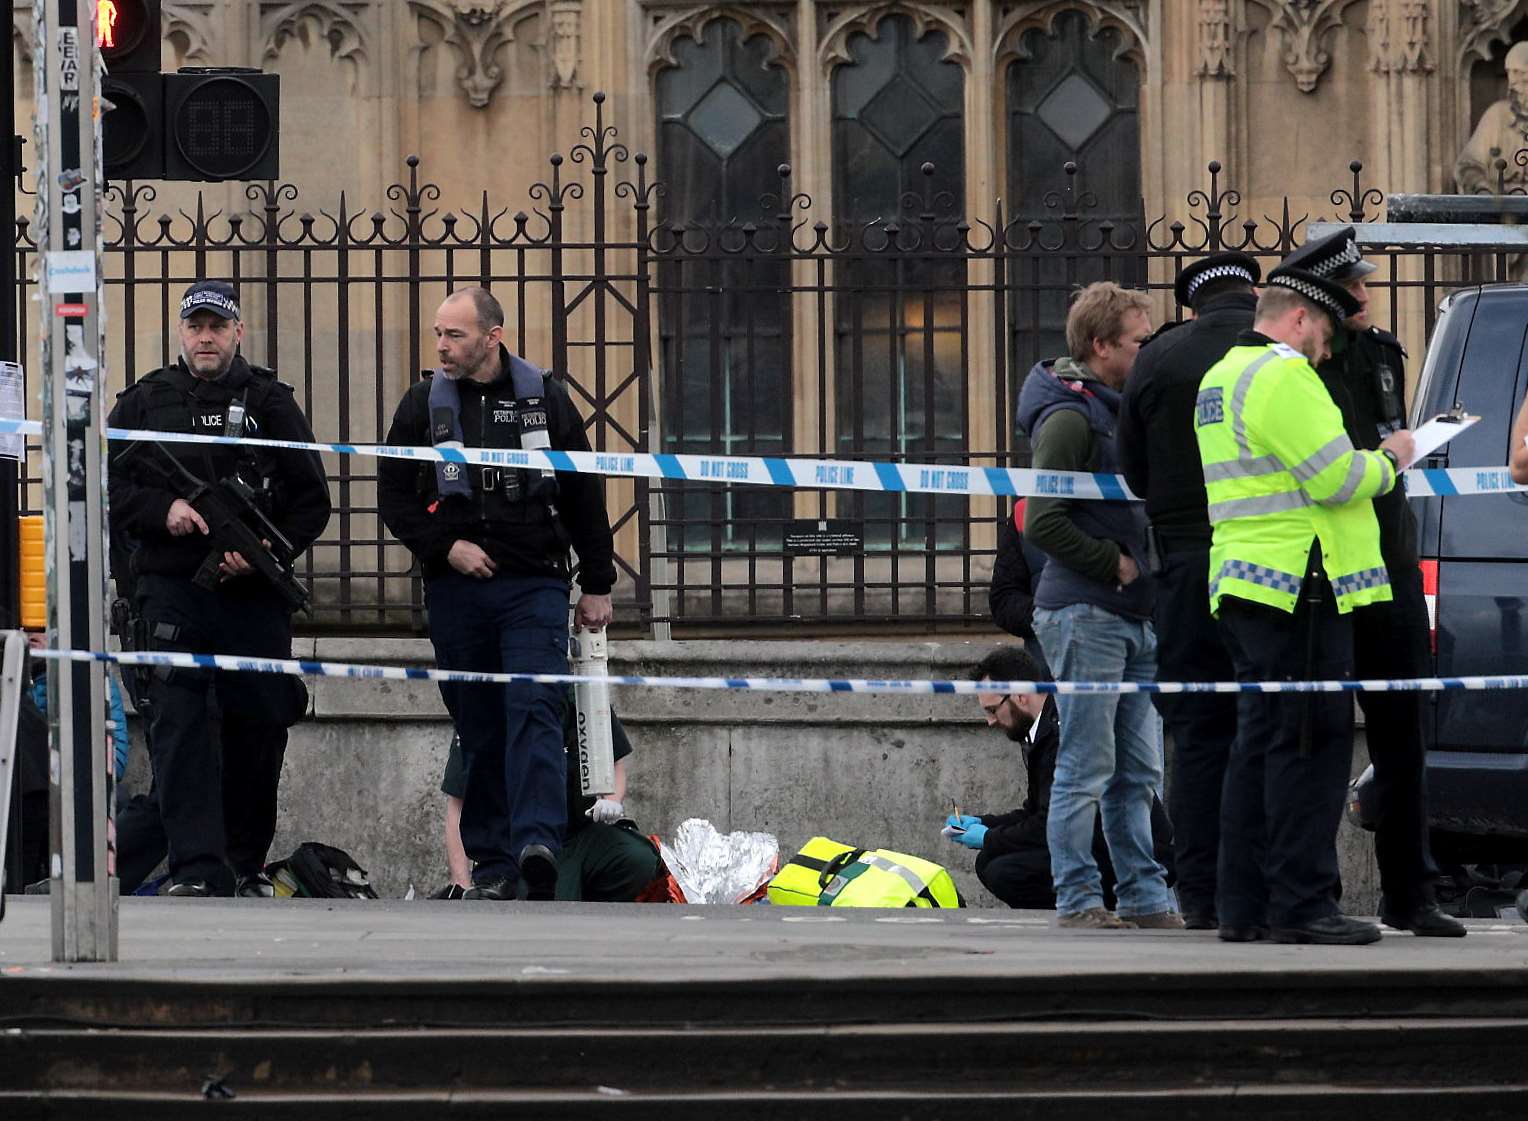 Police in the aftermath of Khalid Masood's assault on Westminster. Credit: SWNS.com